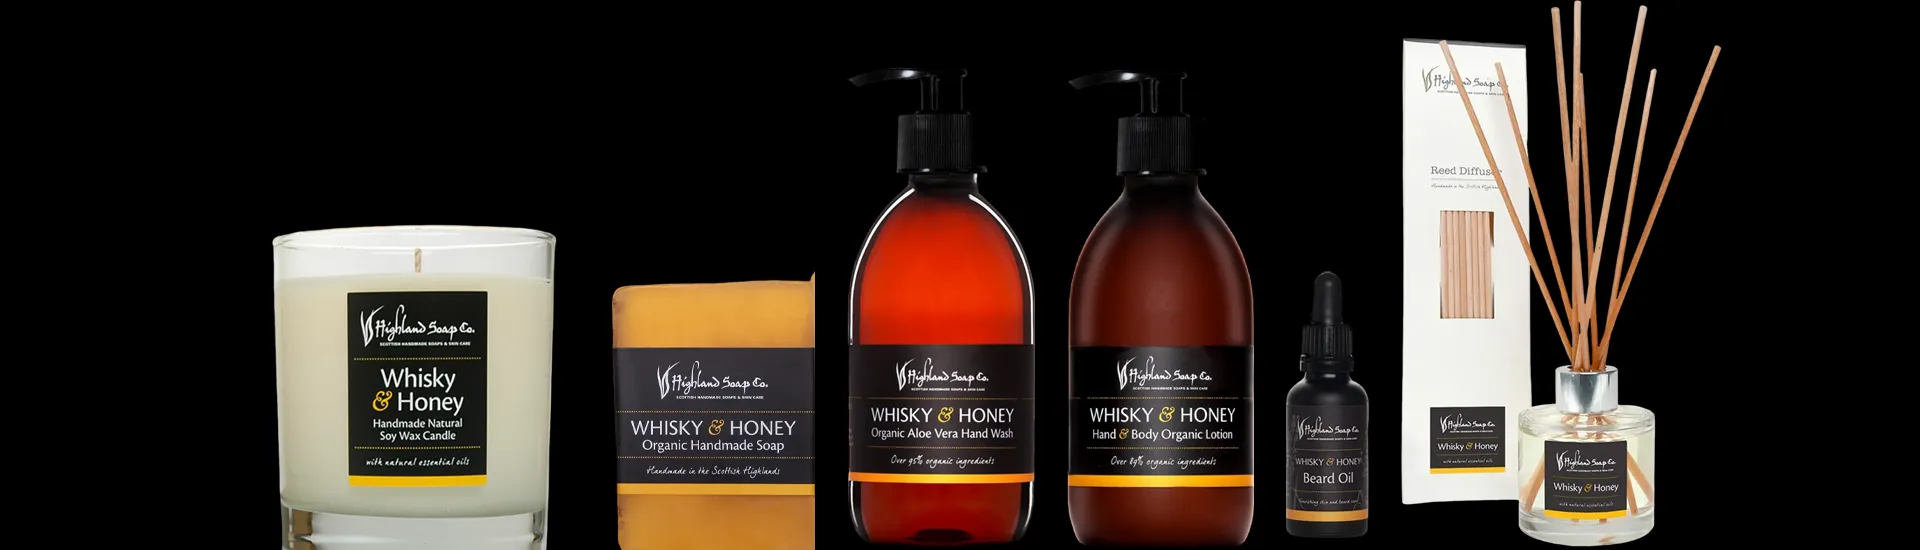 Whisky & Honny products - Fadandel.dk